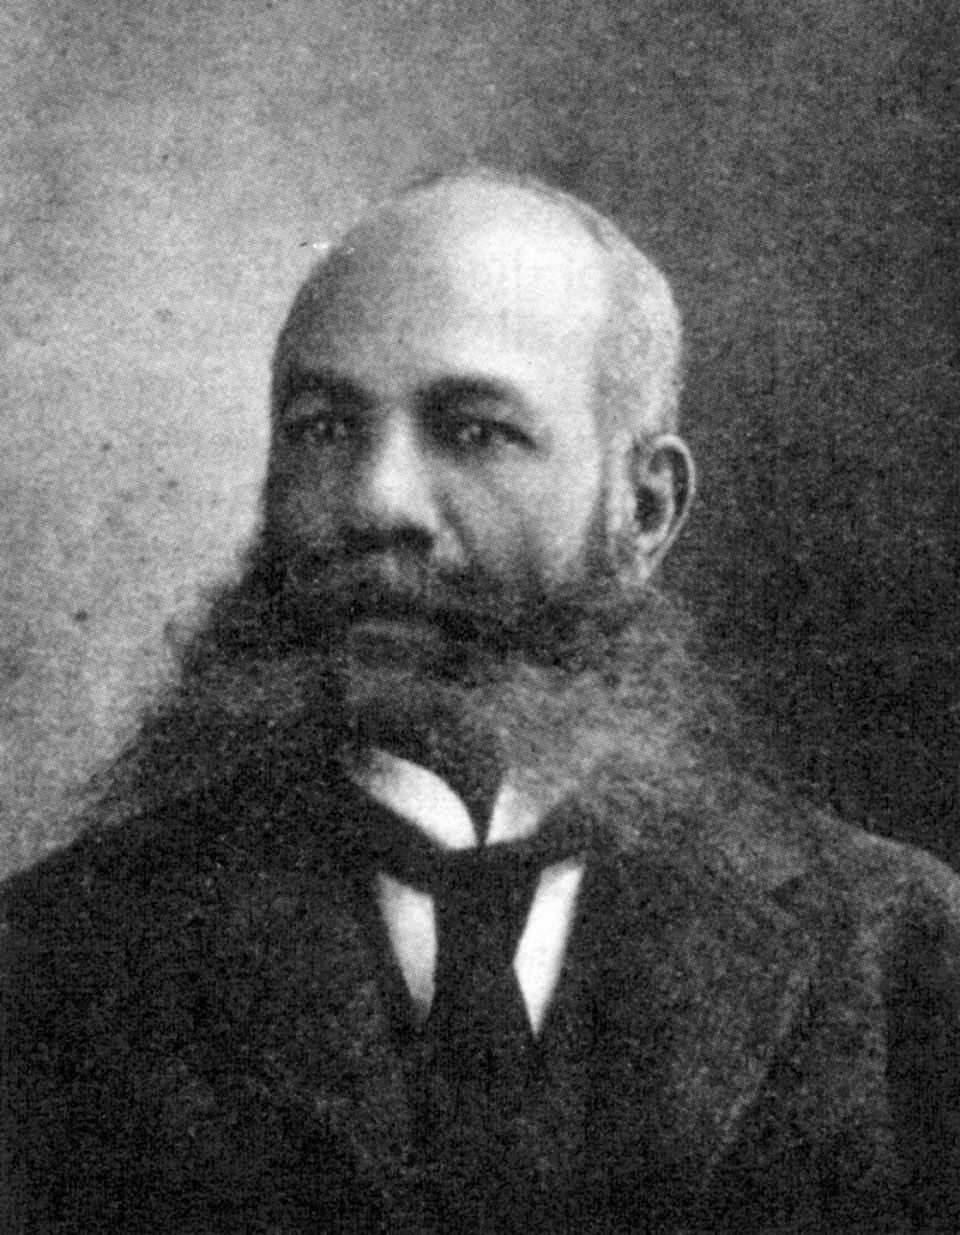 alexander miles looks to the left, he wears a suit jacket, collared shirt and tie with a large full beard